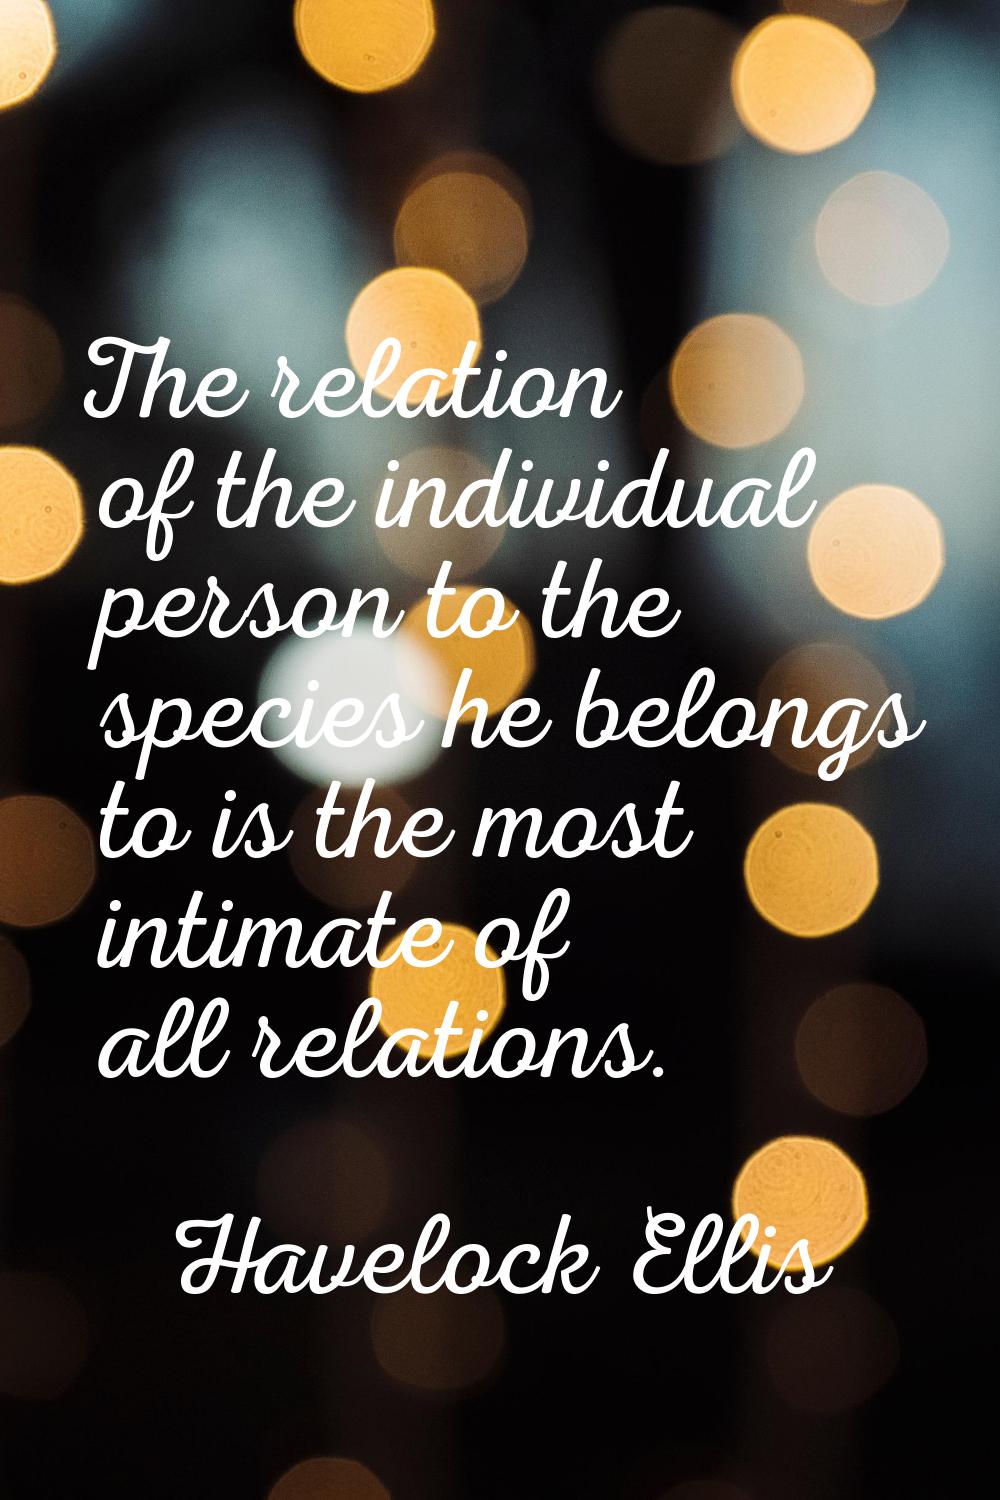 The relation of the individual person to the species he belongs to is the most intimate of all rela